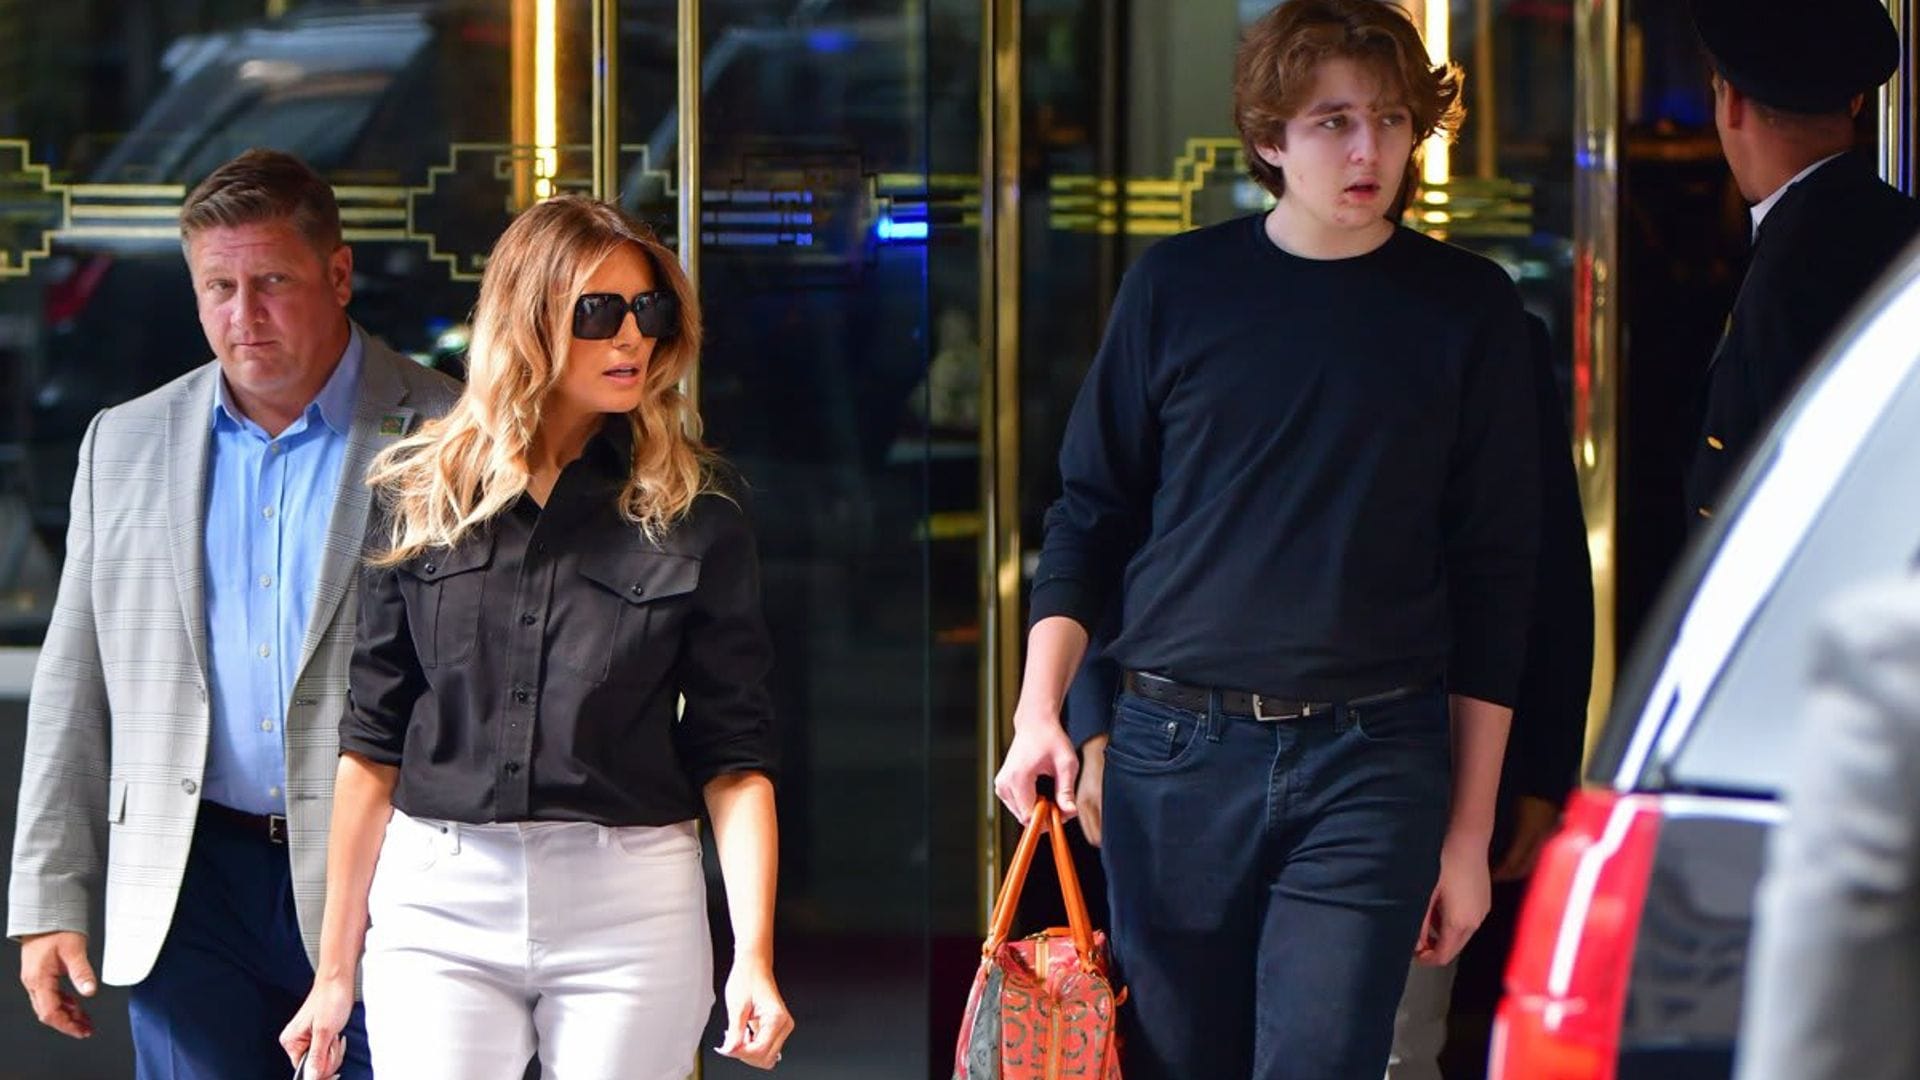 Barron Trump shows off 6-foot-7 stature in NYC walking next to his mom, Melania